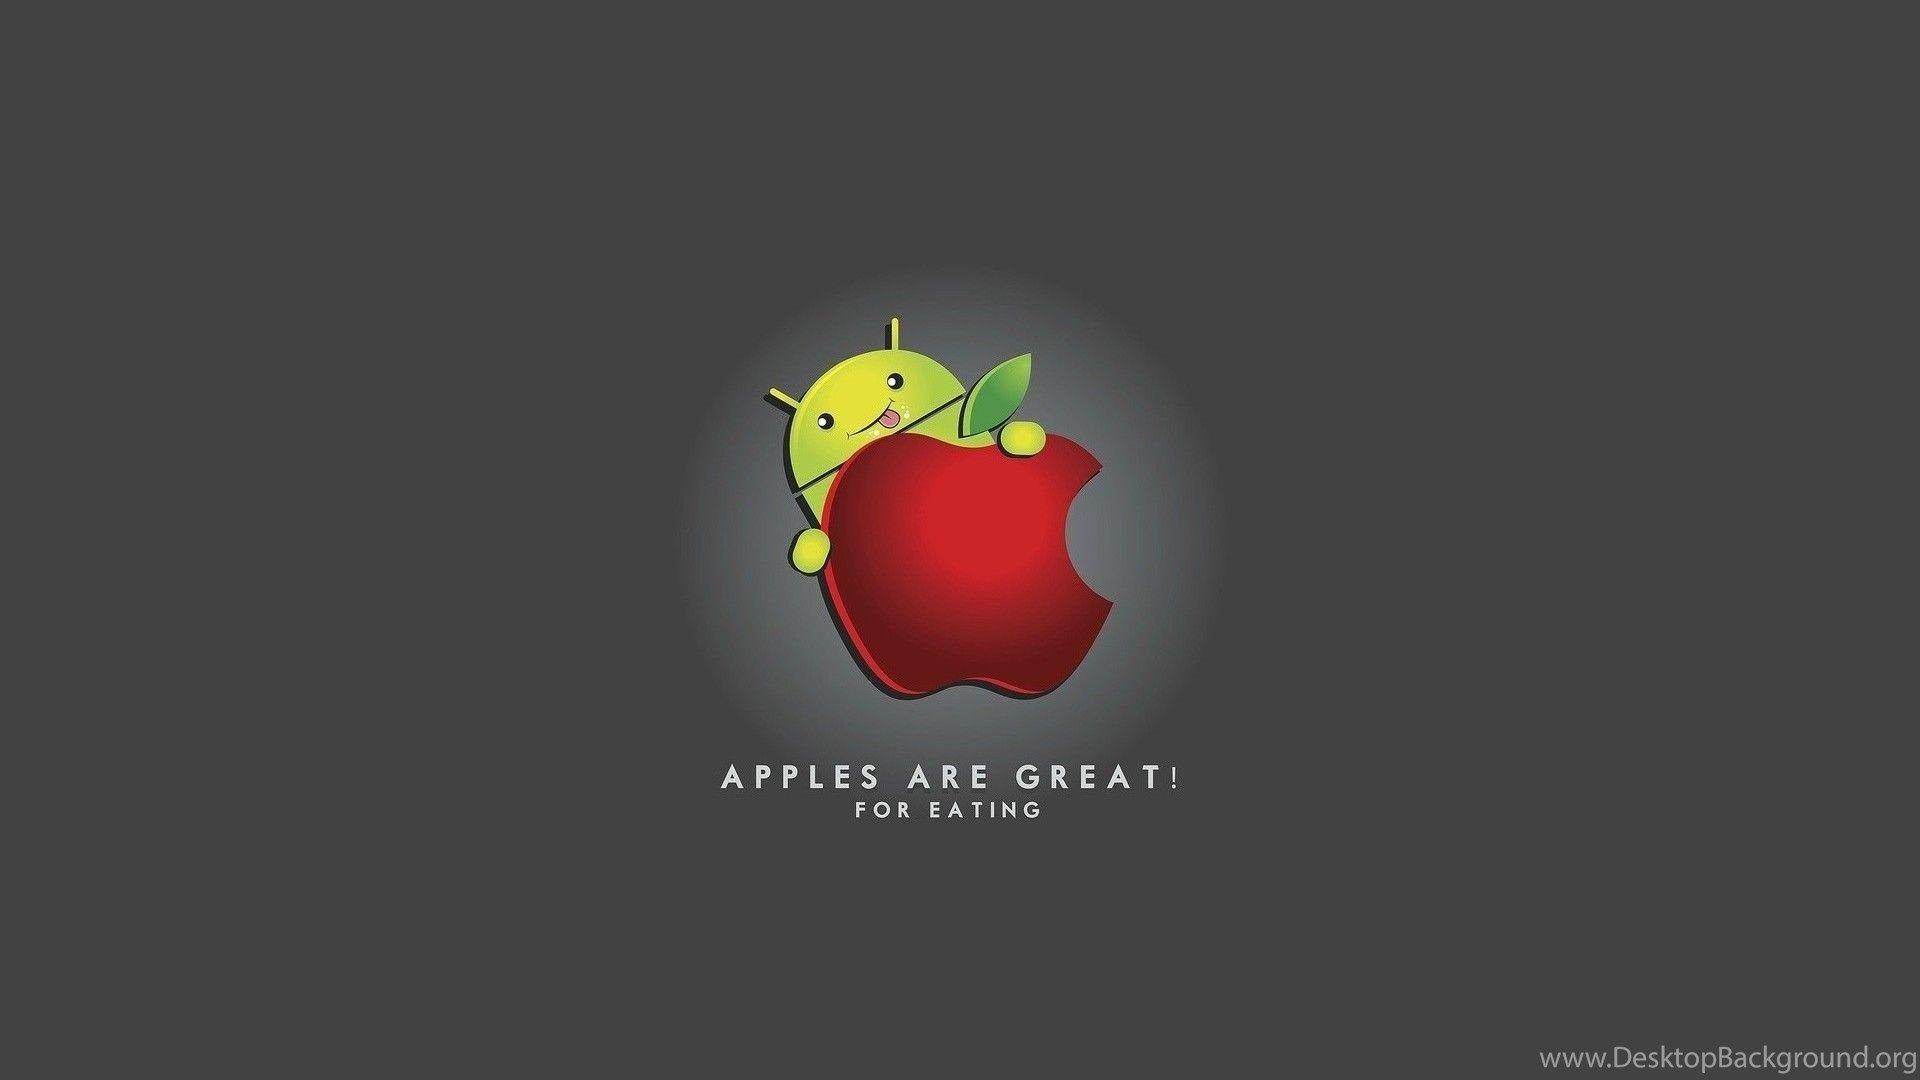 Funny Apple Logo - Apple: Android Apple Logo Funny Free Wallpapers For HD 16:9 High ...